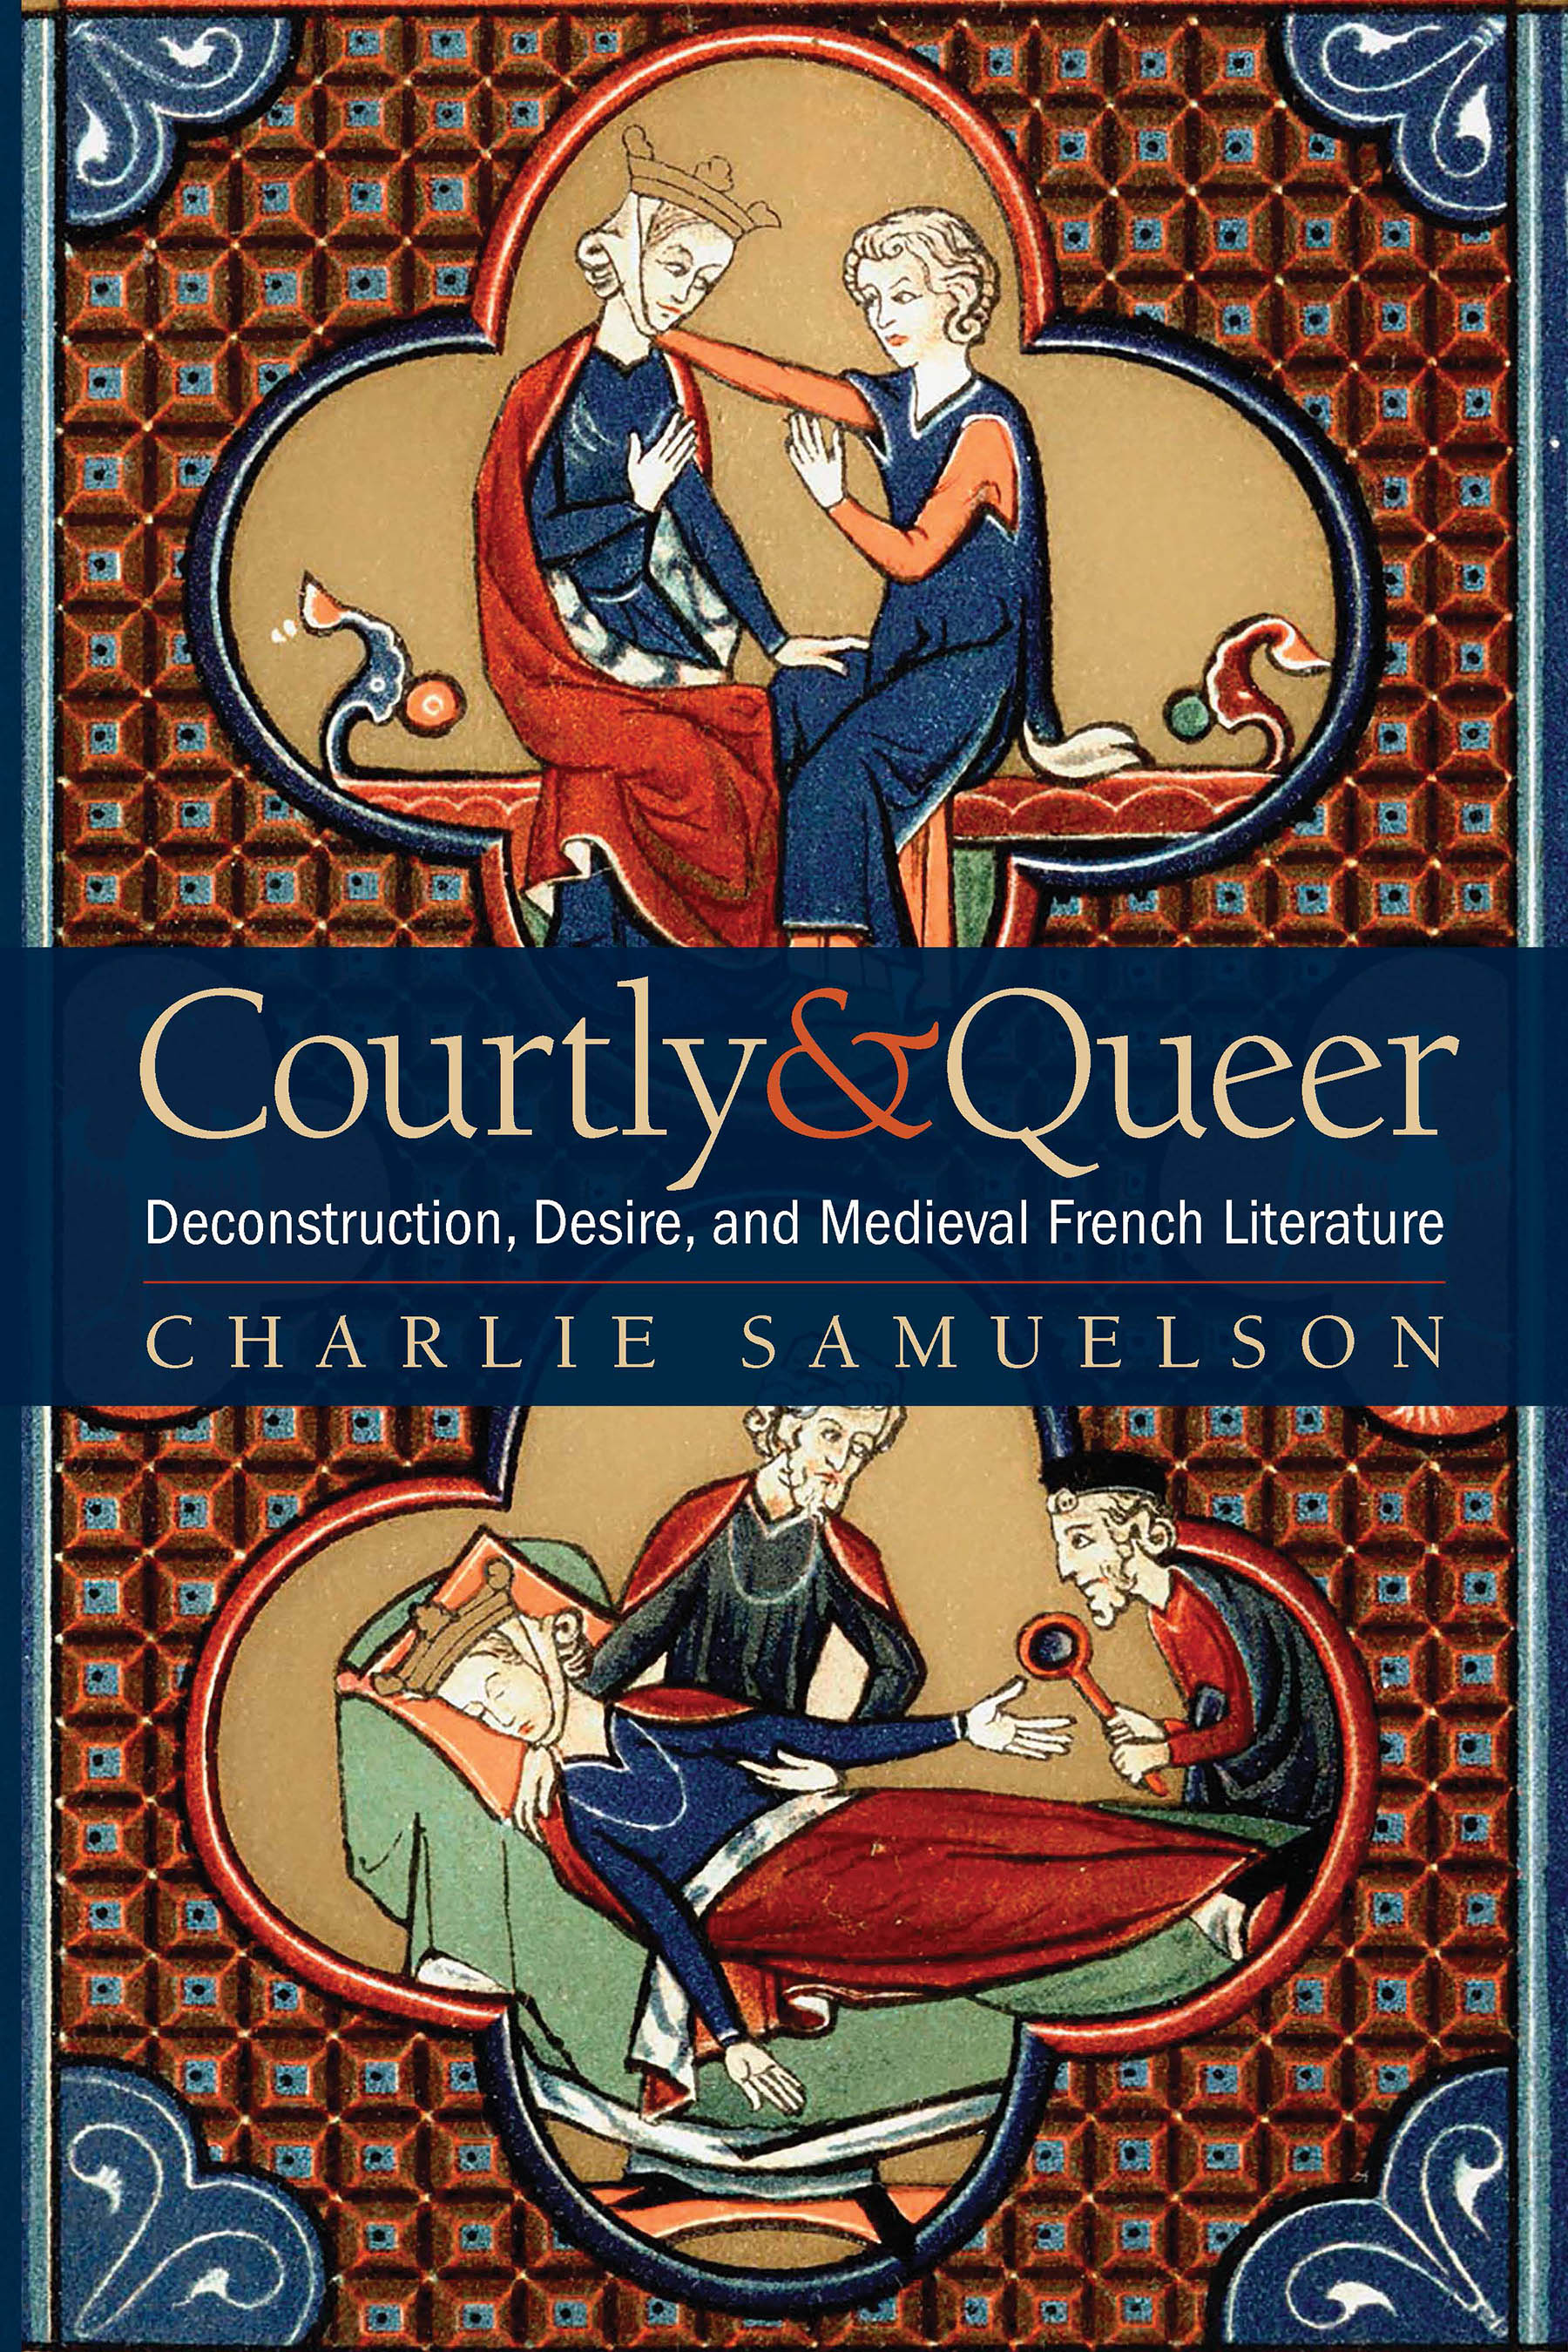 Courtly and Queer